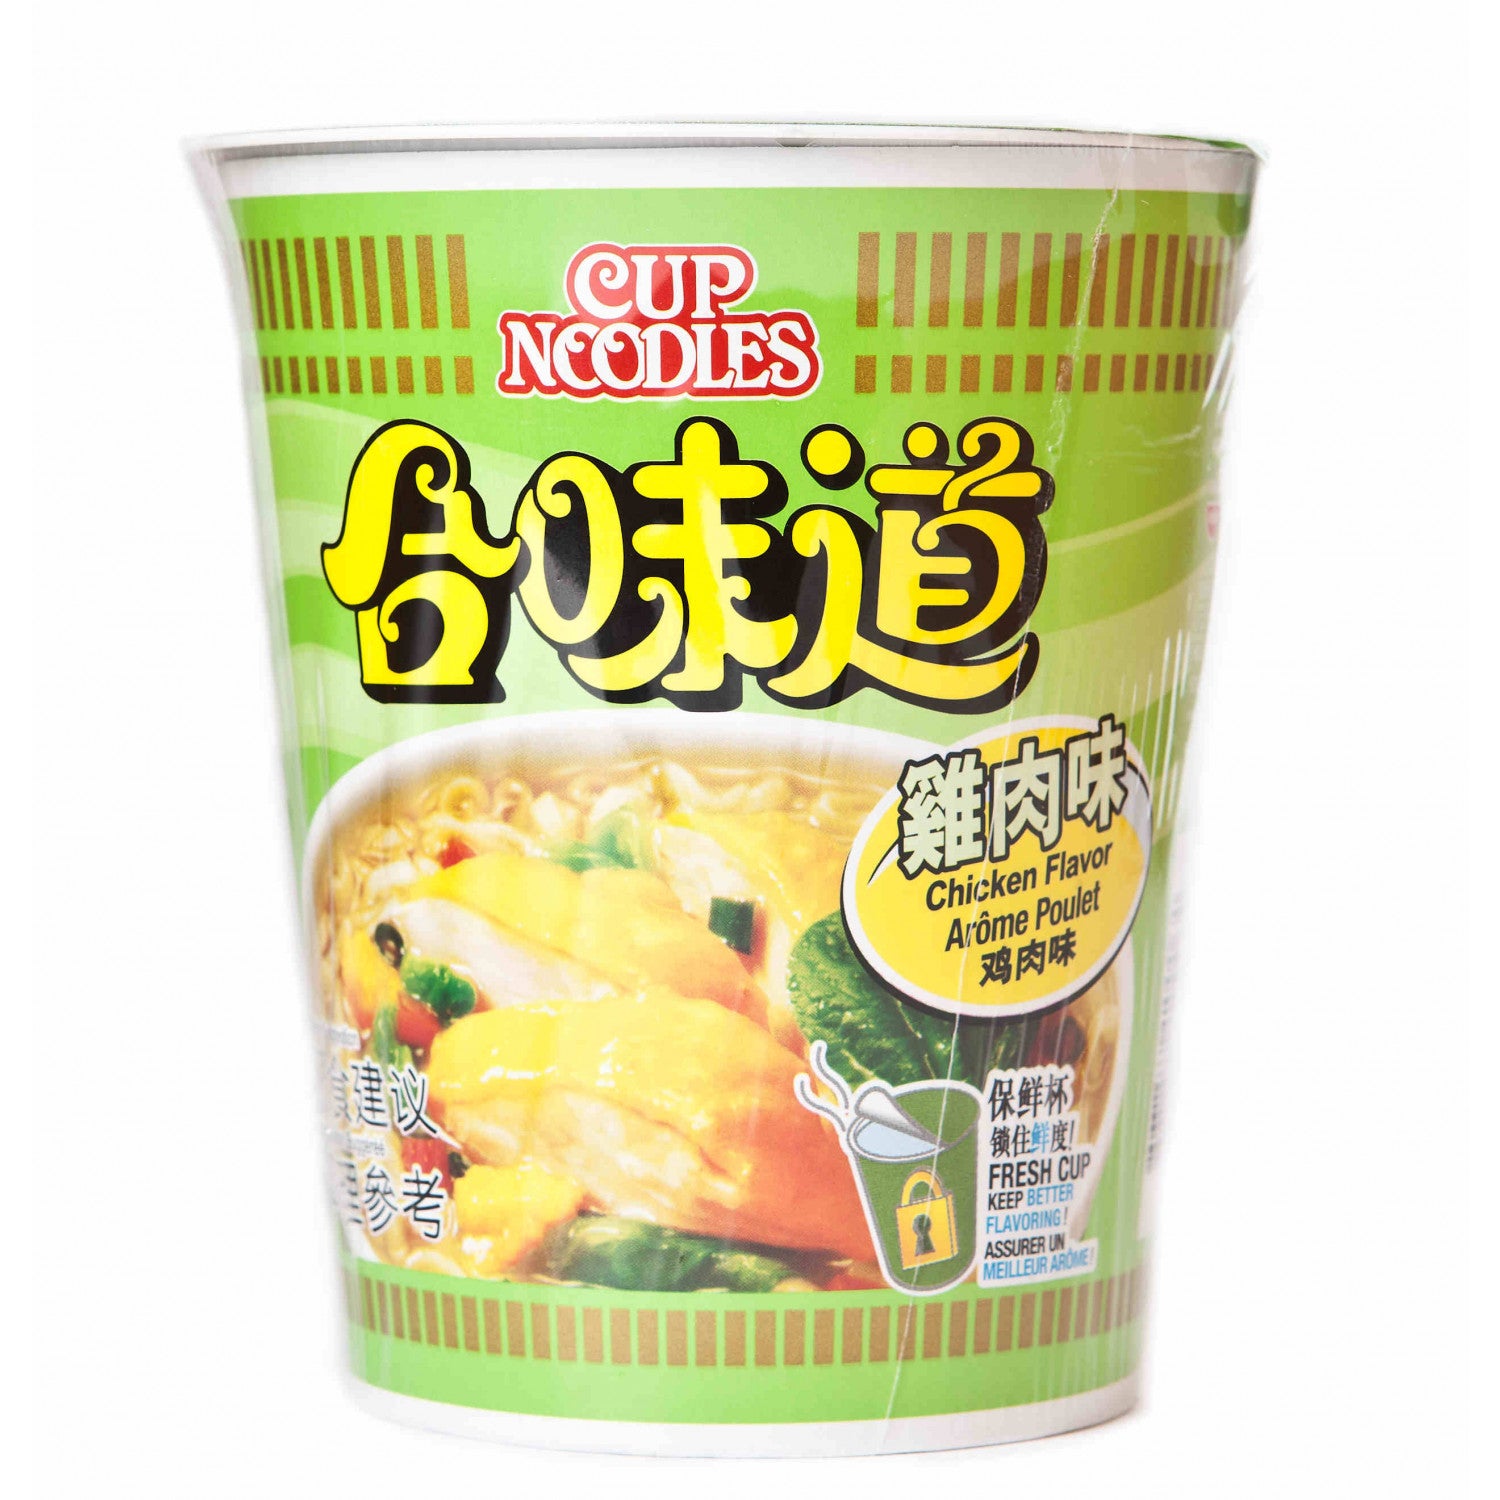 CUP NOODLES™ Chicken Flavour 74g by Nissin